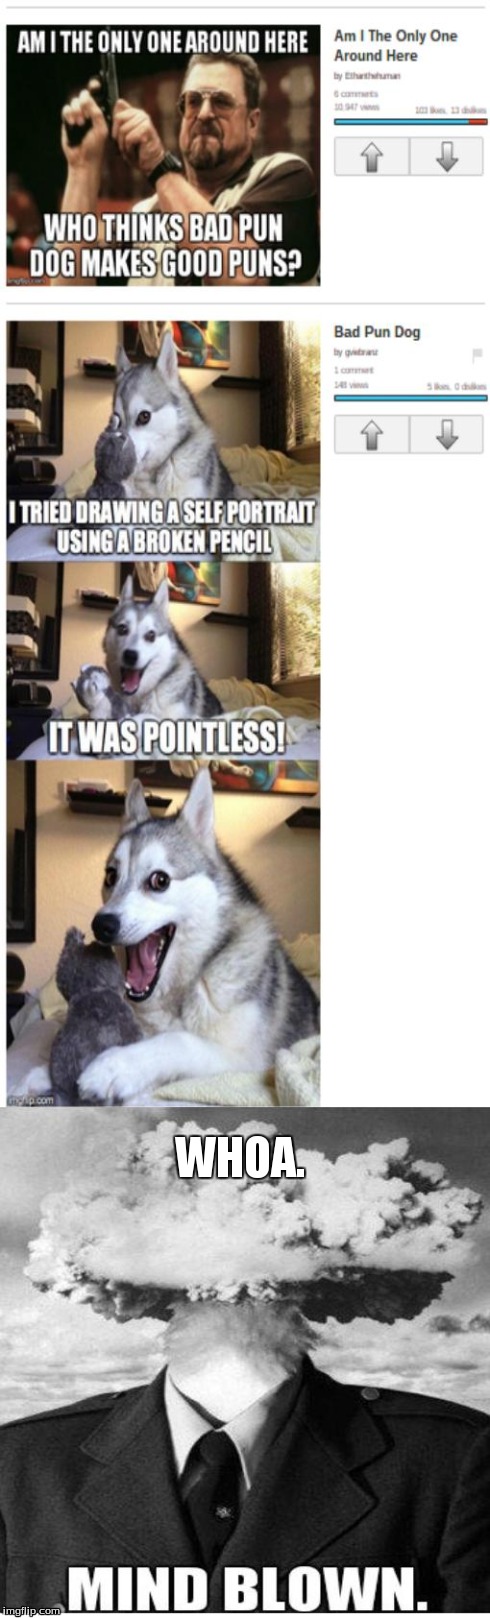 Mind Blown | WHOA. | image tagged in am i the only one around here,bad pun dog,imgflip | made w/ Imgflip meme maker